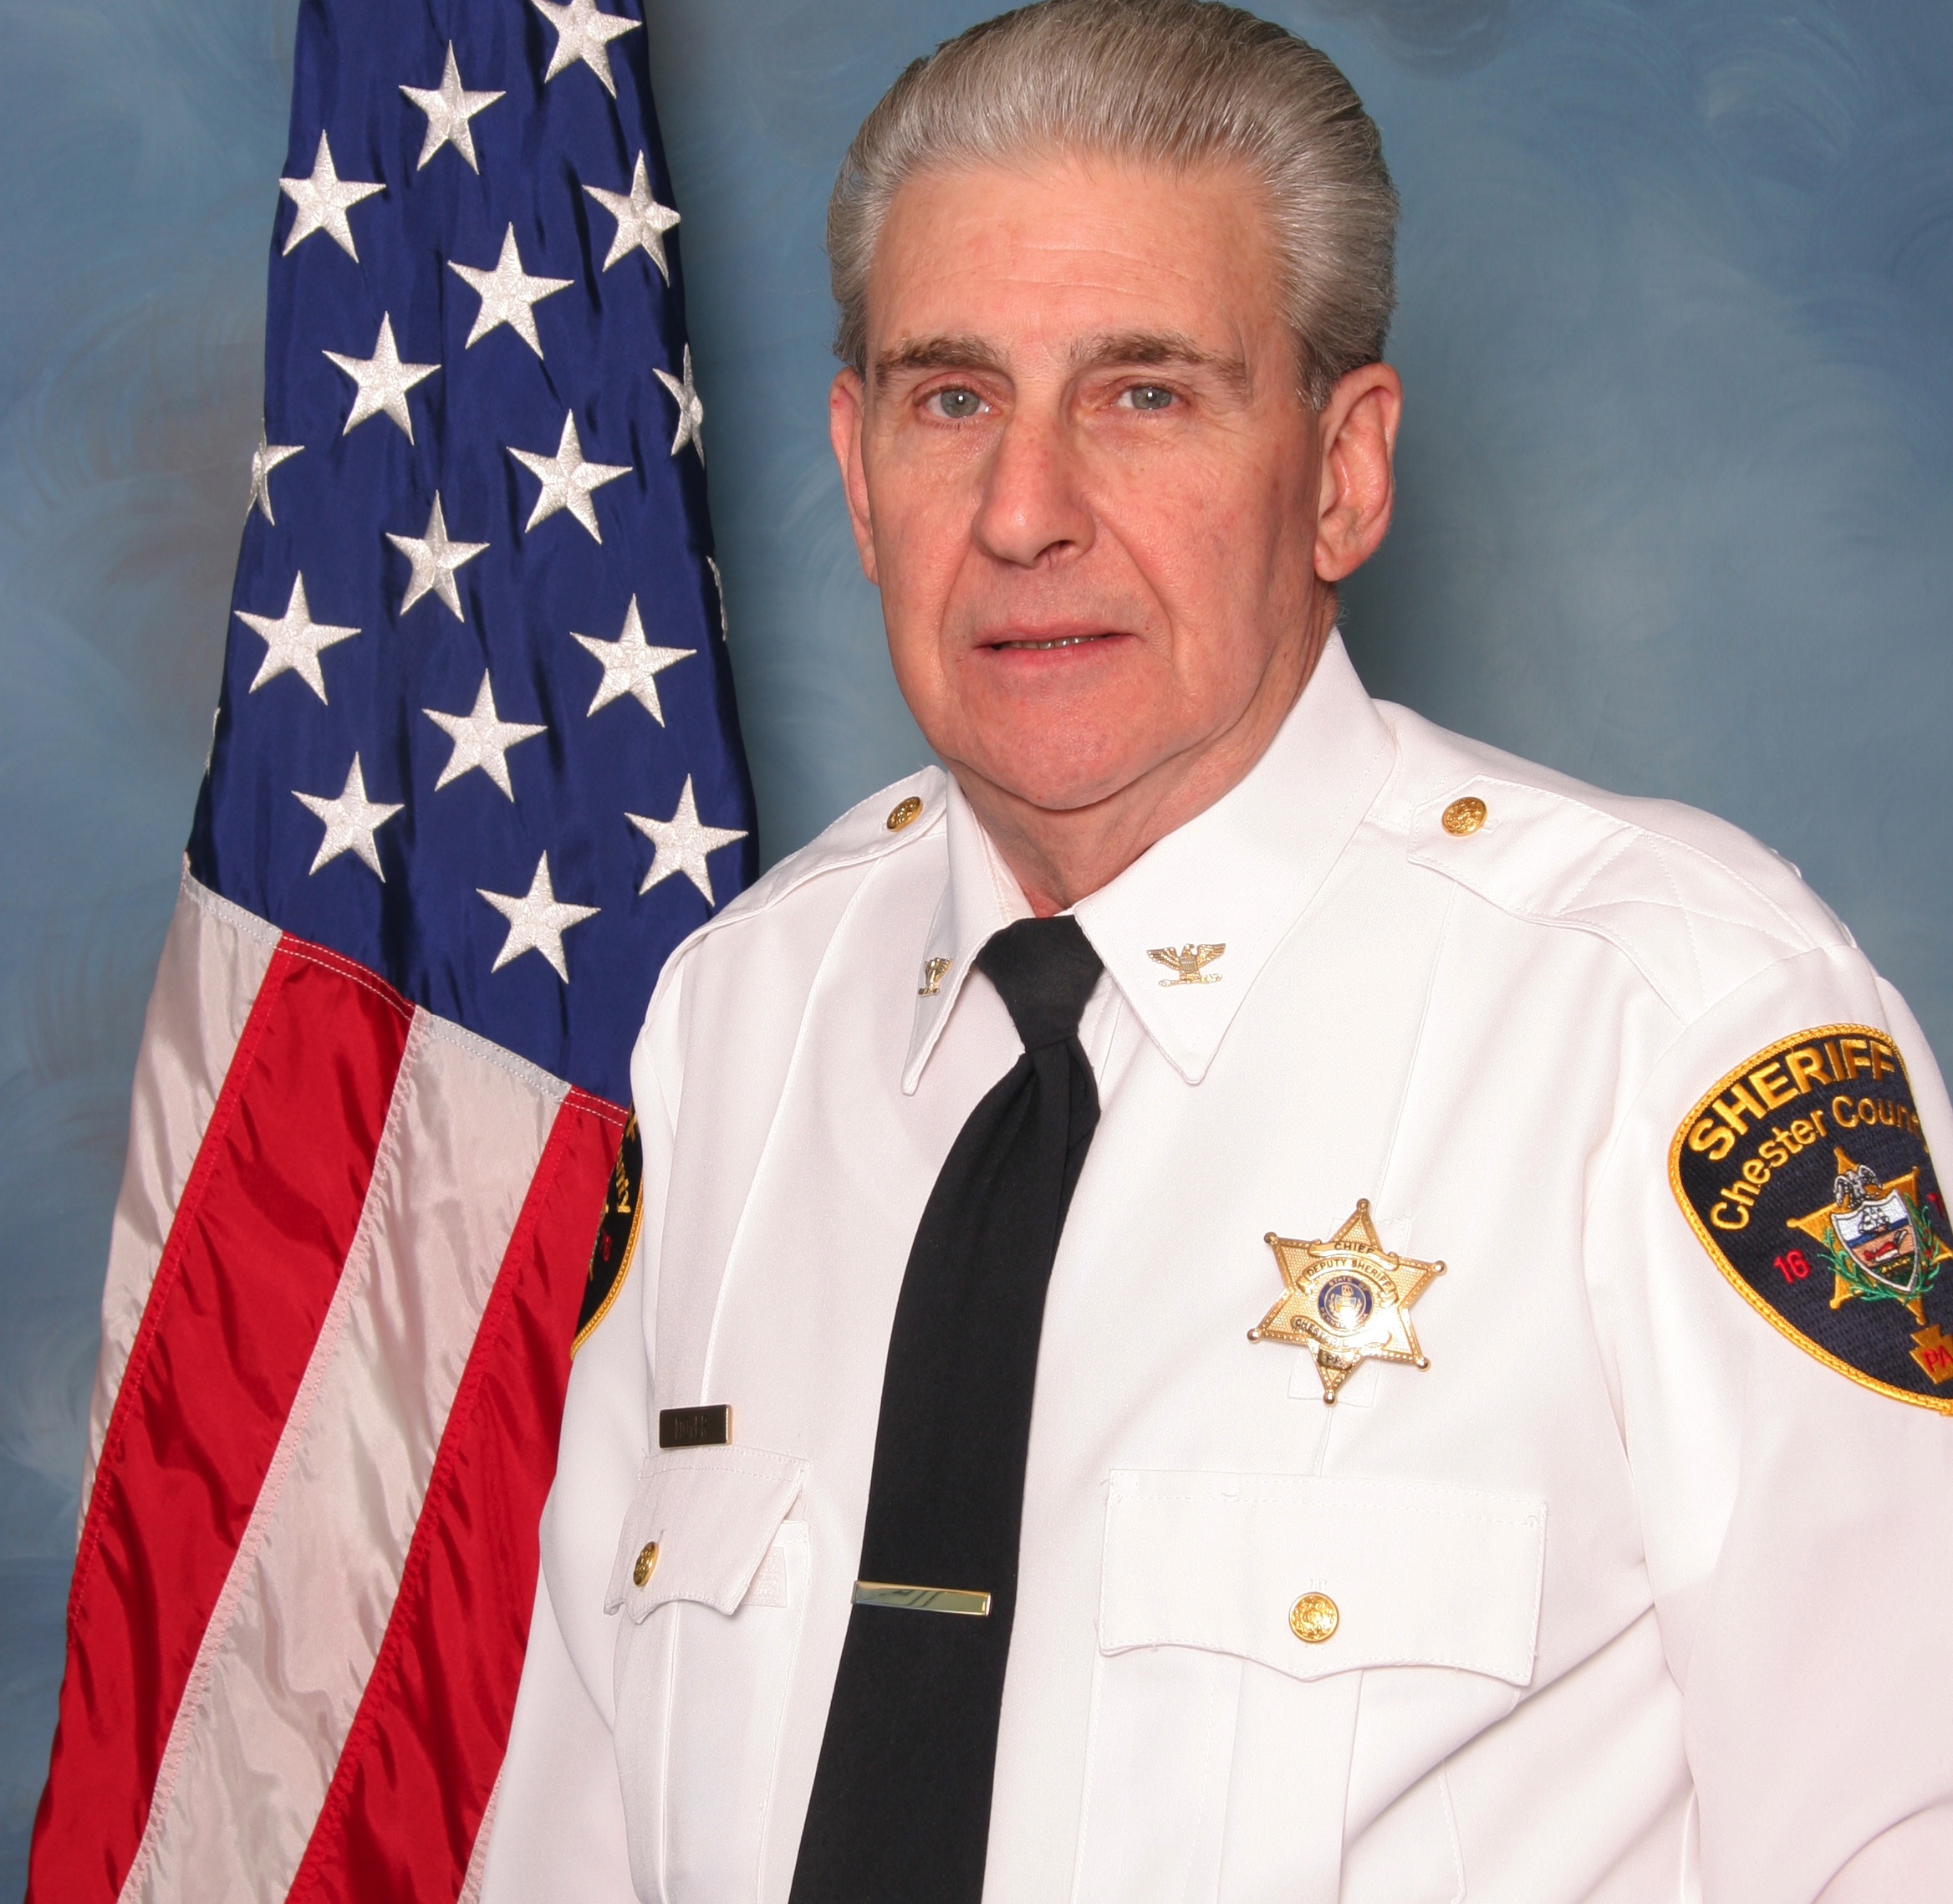 Sheriff’s Office mourning passing of chief deputy | The Coatesville Times